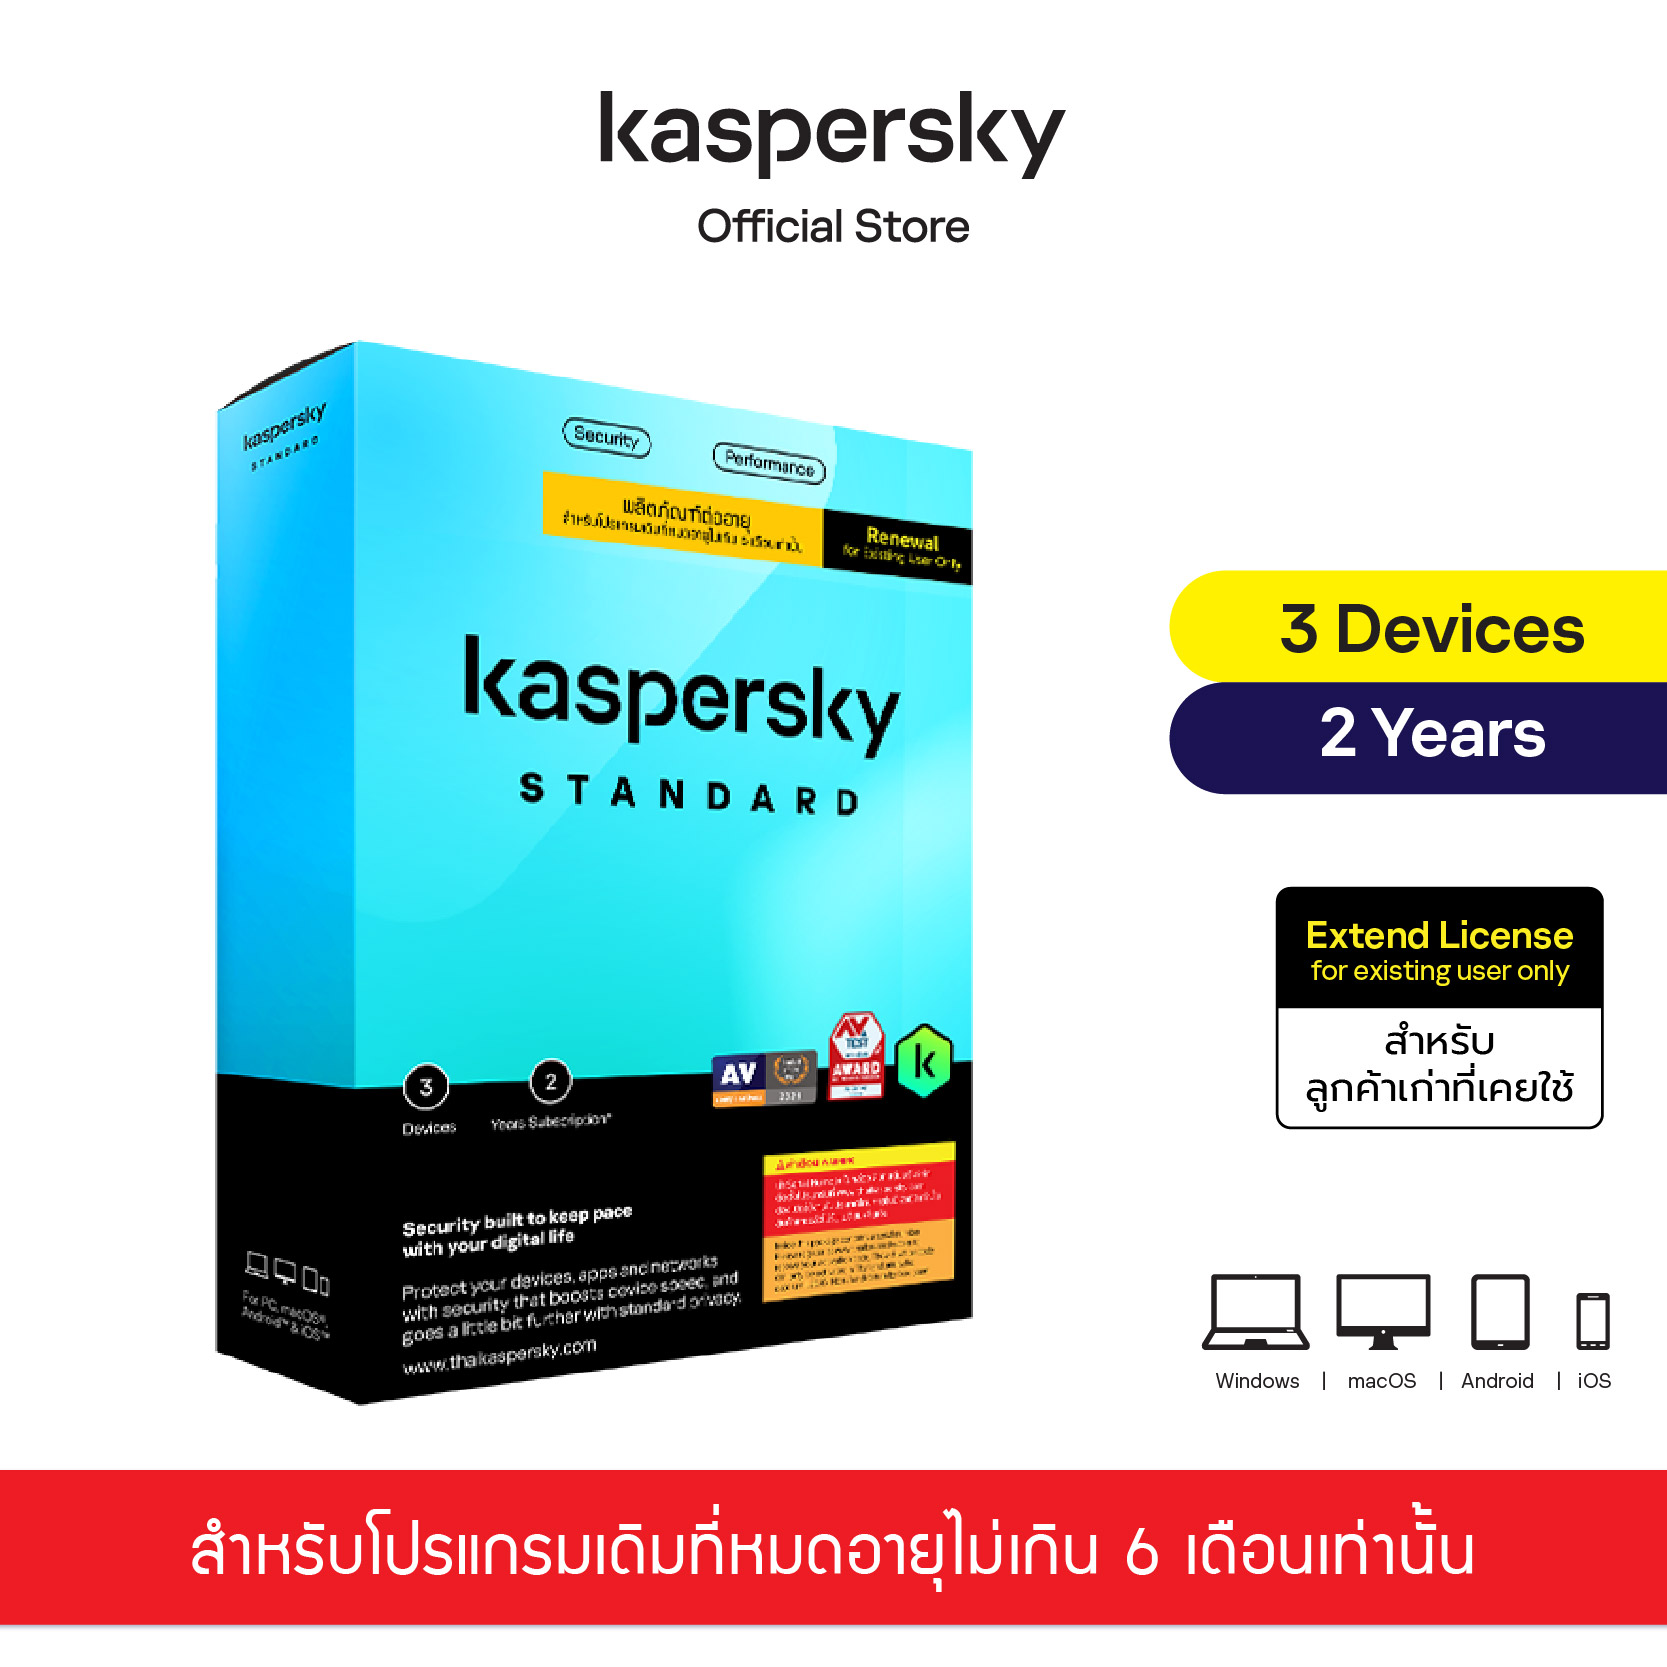 Kaspersky Standard 3 Devices 2 Year (Extend  License)